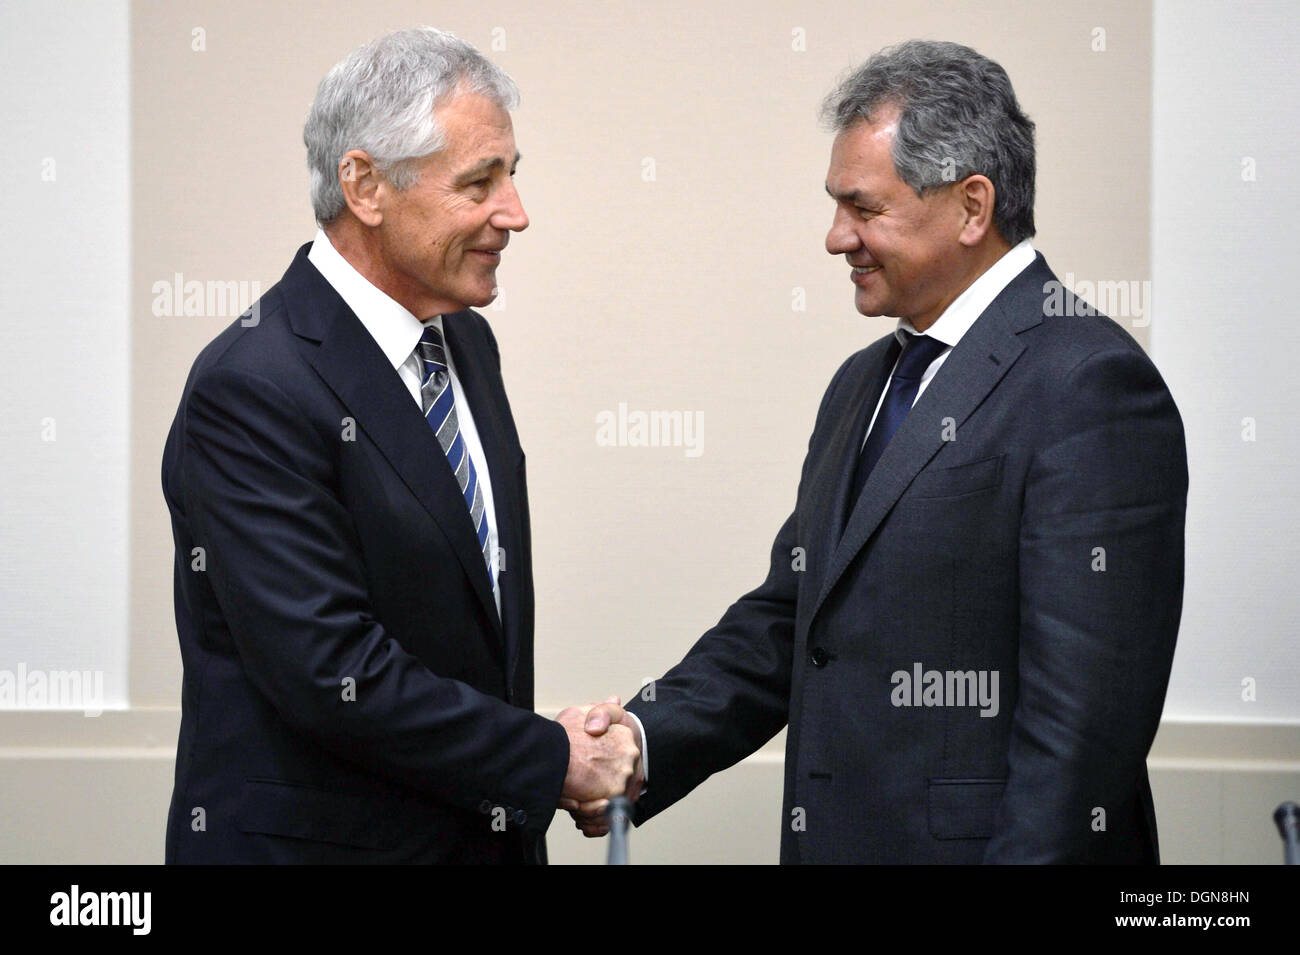 US Secretary of Defense Chuck Hagel shakes hands with Russian Minister of Defense Sergei Shoygu after a meeting of the non-NATO International Security Assistance Force at NATO headquarters October 23, 2013 in Brussels, Belgium. Stock Photo